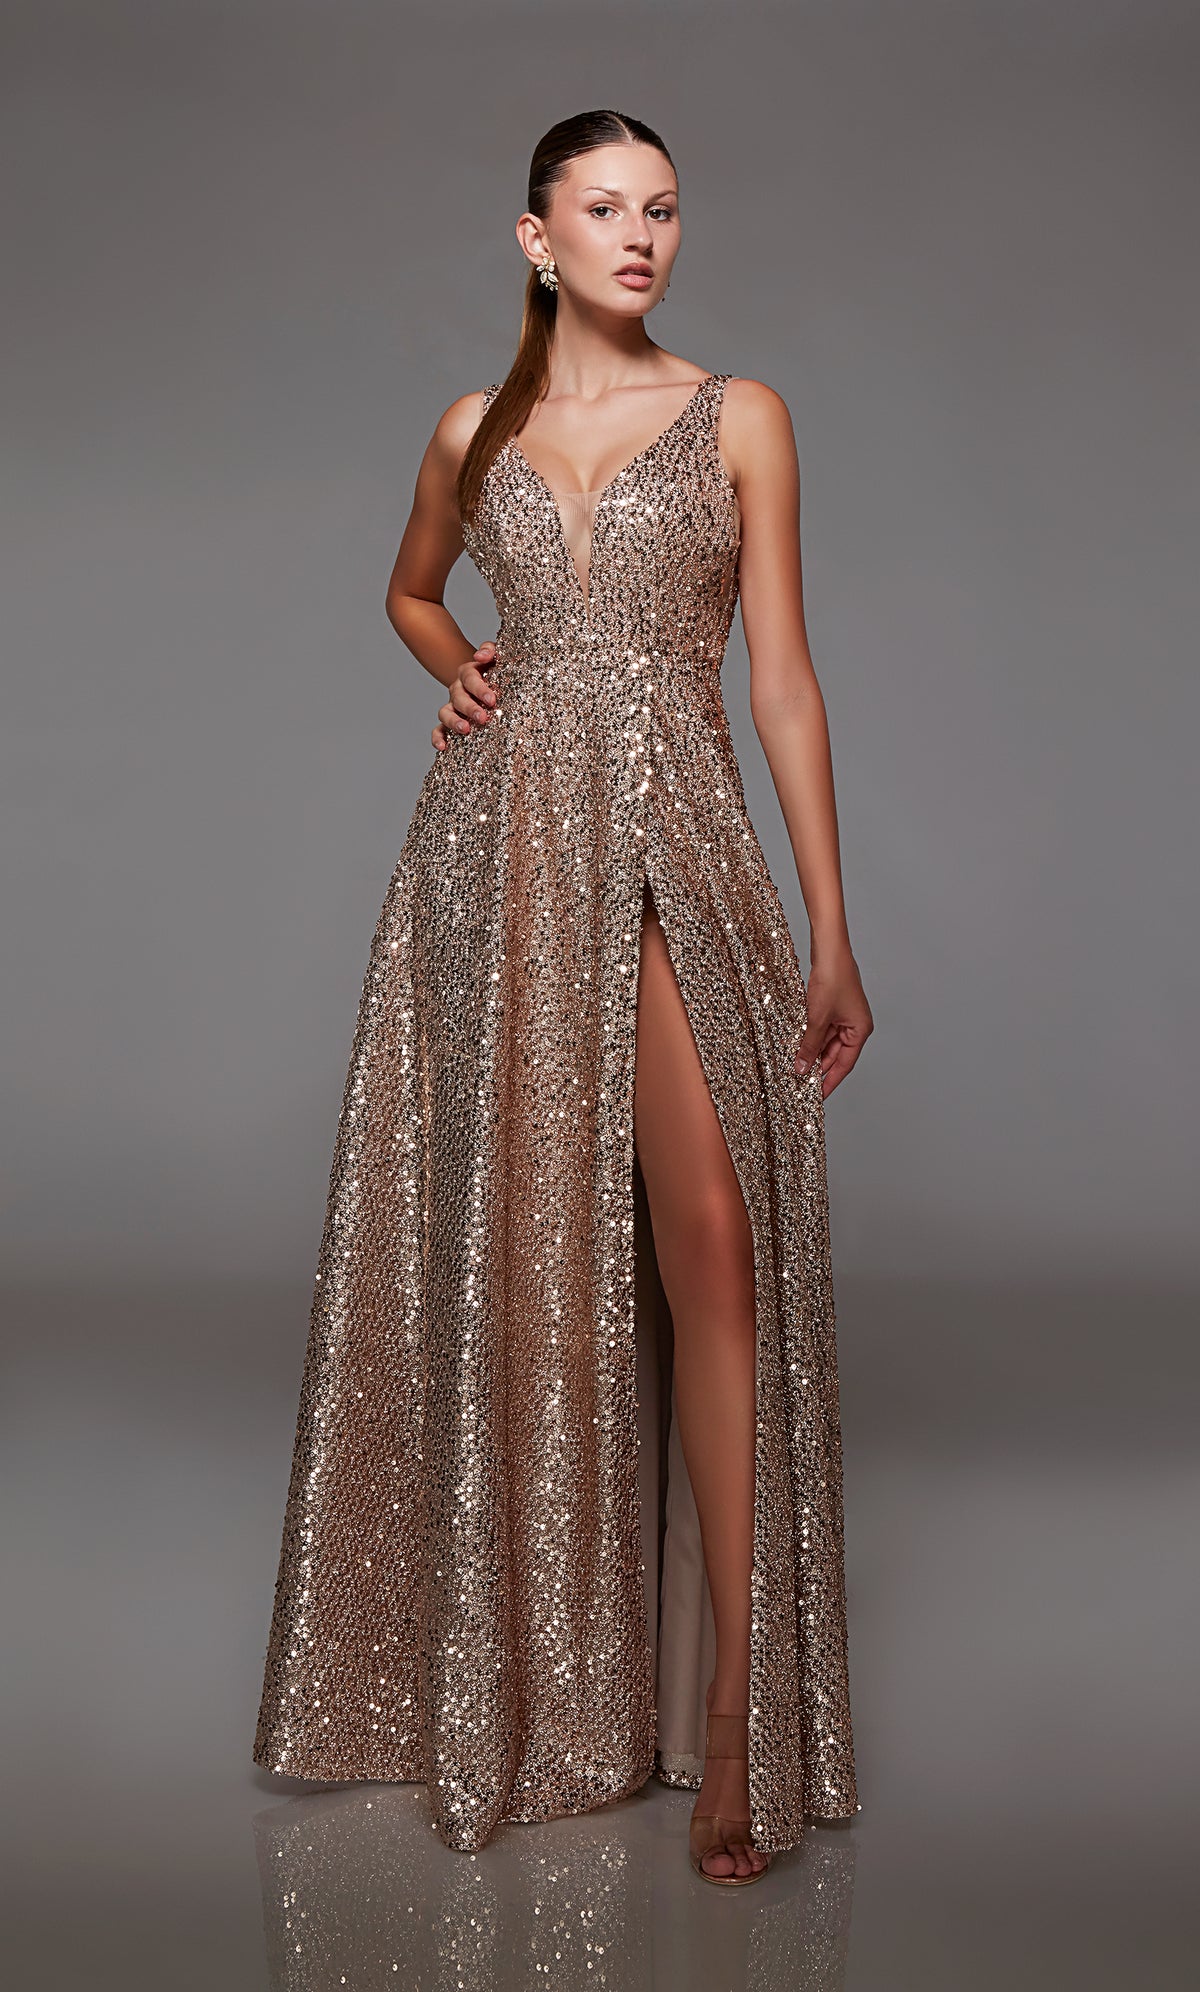 Rose gold prom dress: A-line silhouette, plunging neckline, front slit, and an chic V-shaped back for an stylish and glam look. Designed by ALYCE Paris.